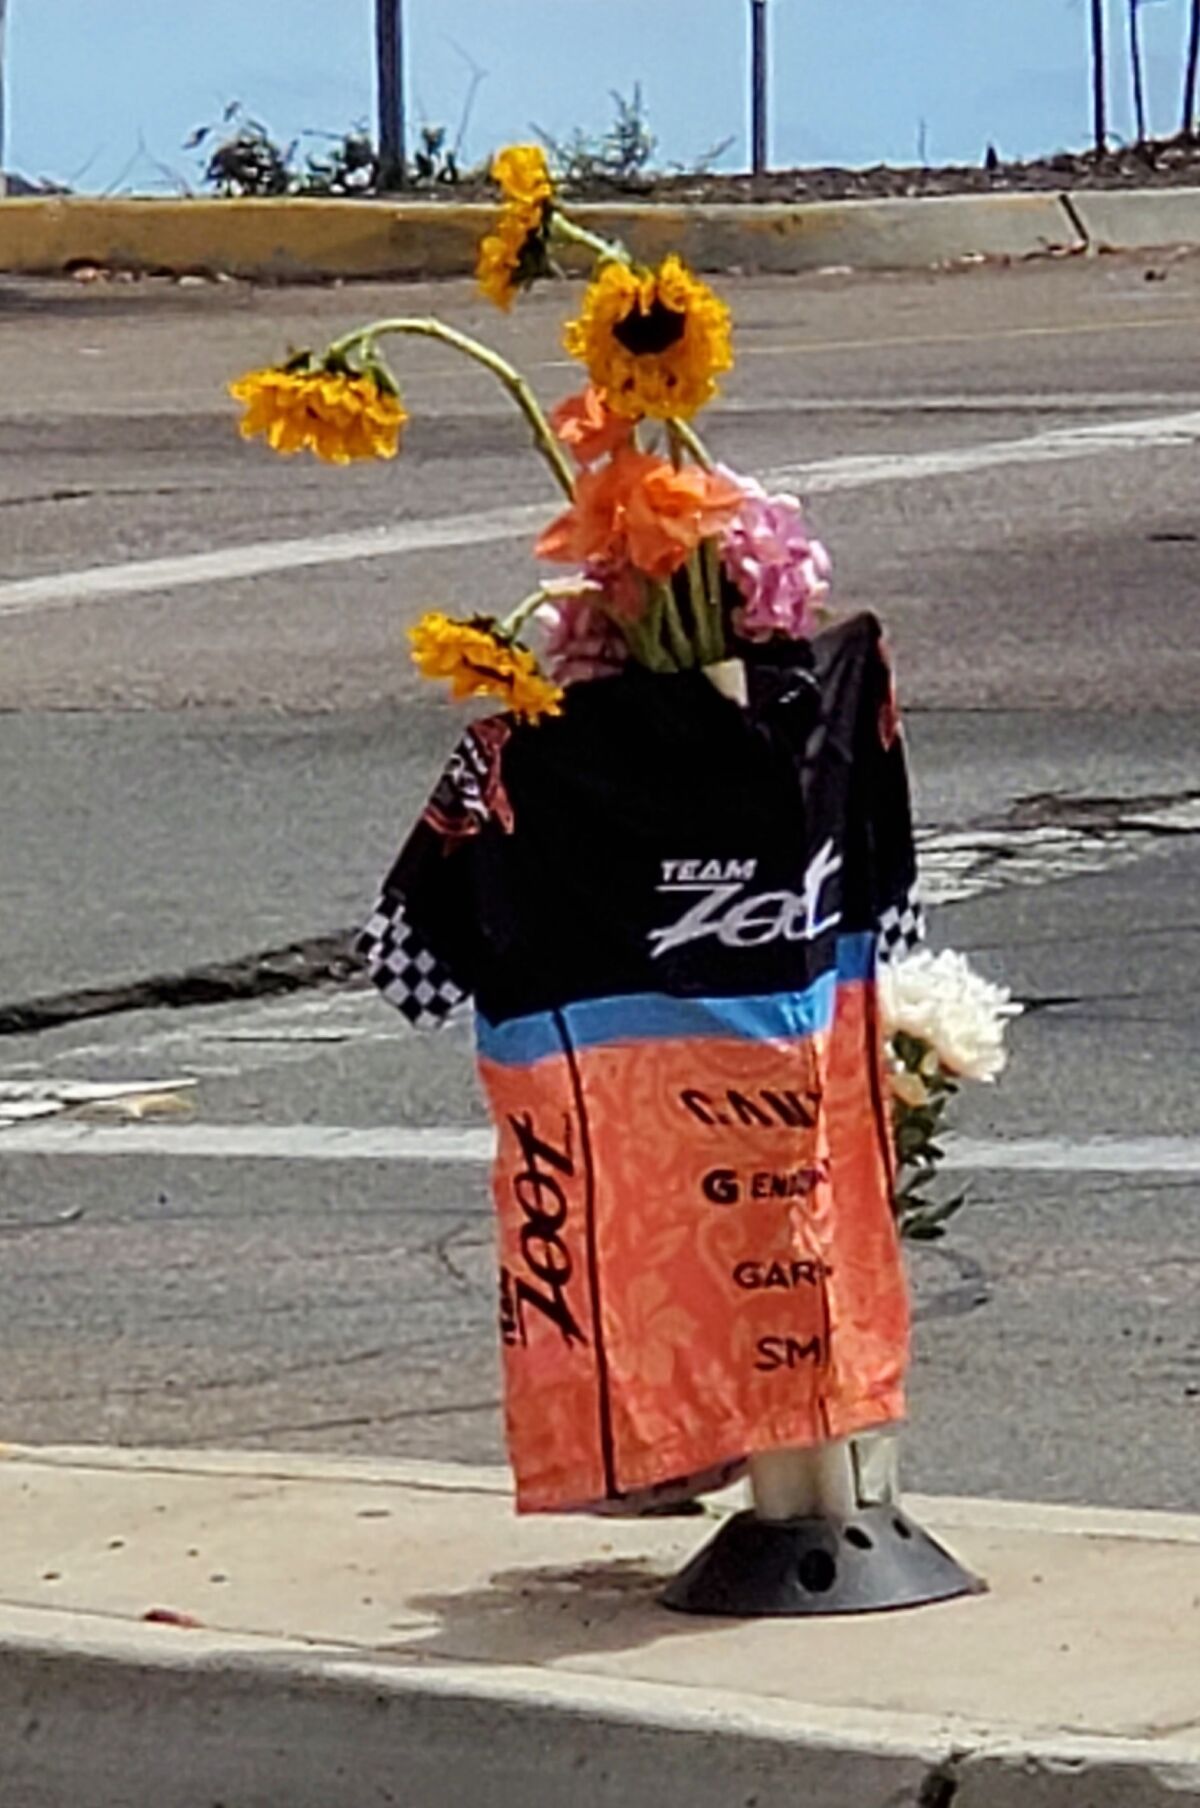 Flowers and a cycling jersey mark where 34-year-old bicyclist Swati Tyagi died after being struck by a car in La Jolla.